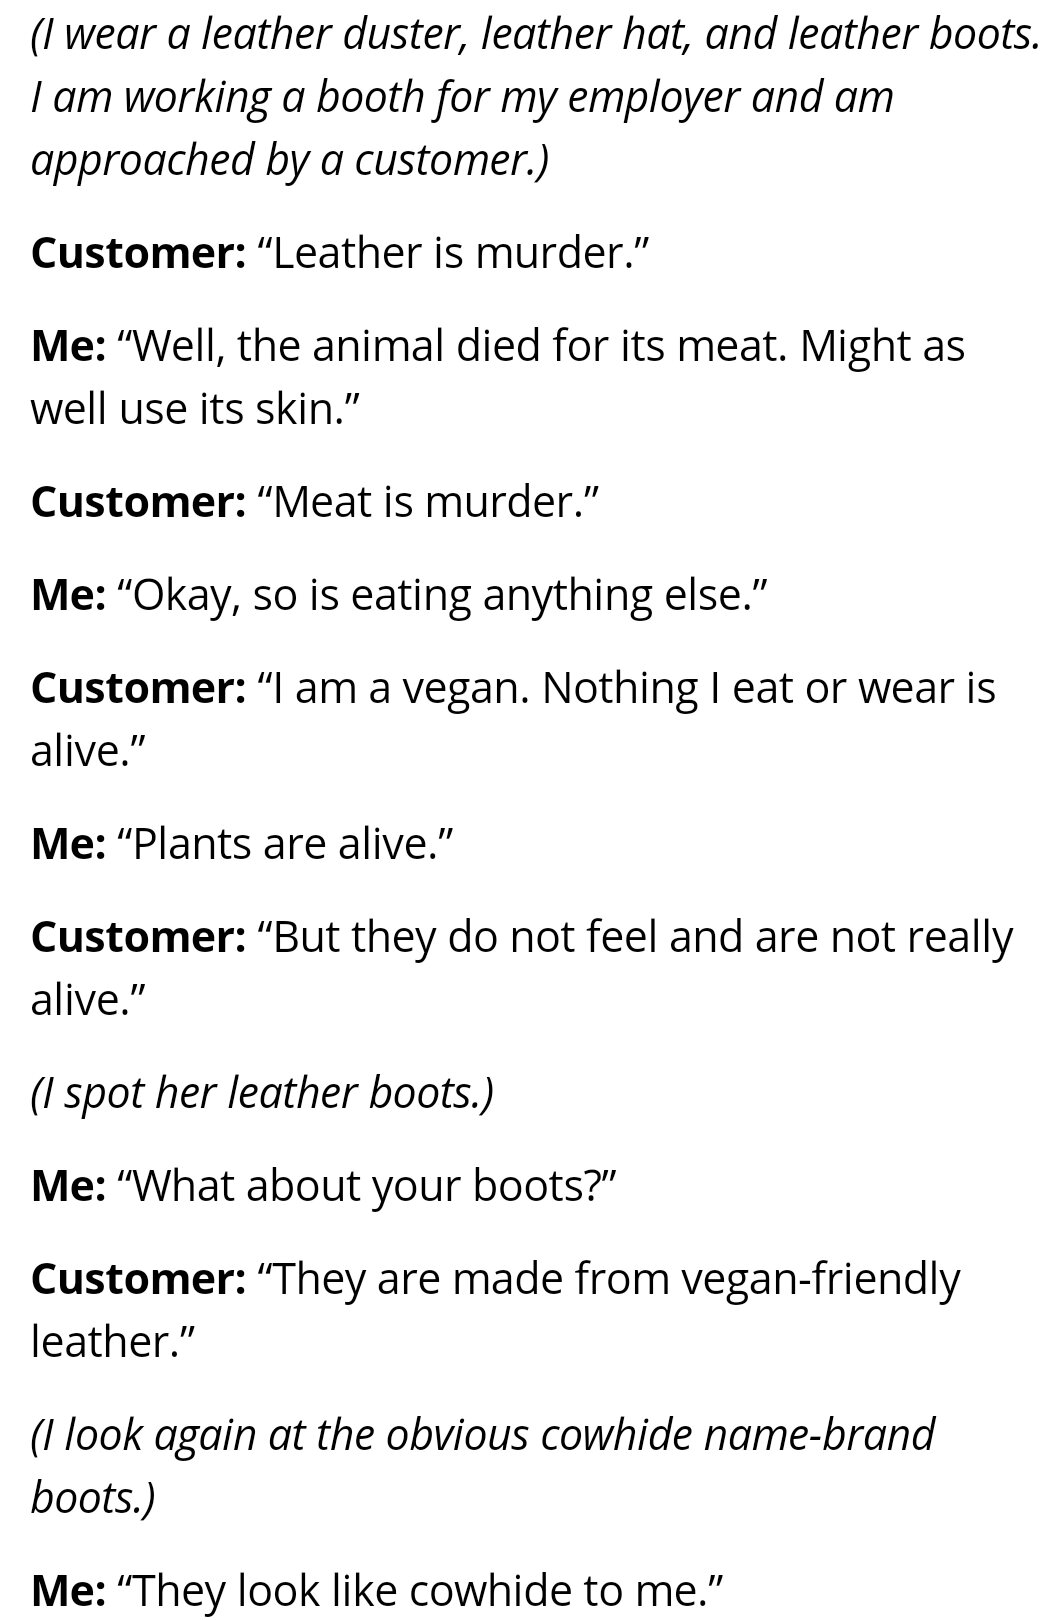 Vegan can't handle facts about leather